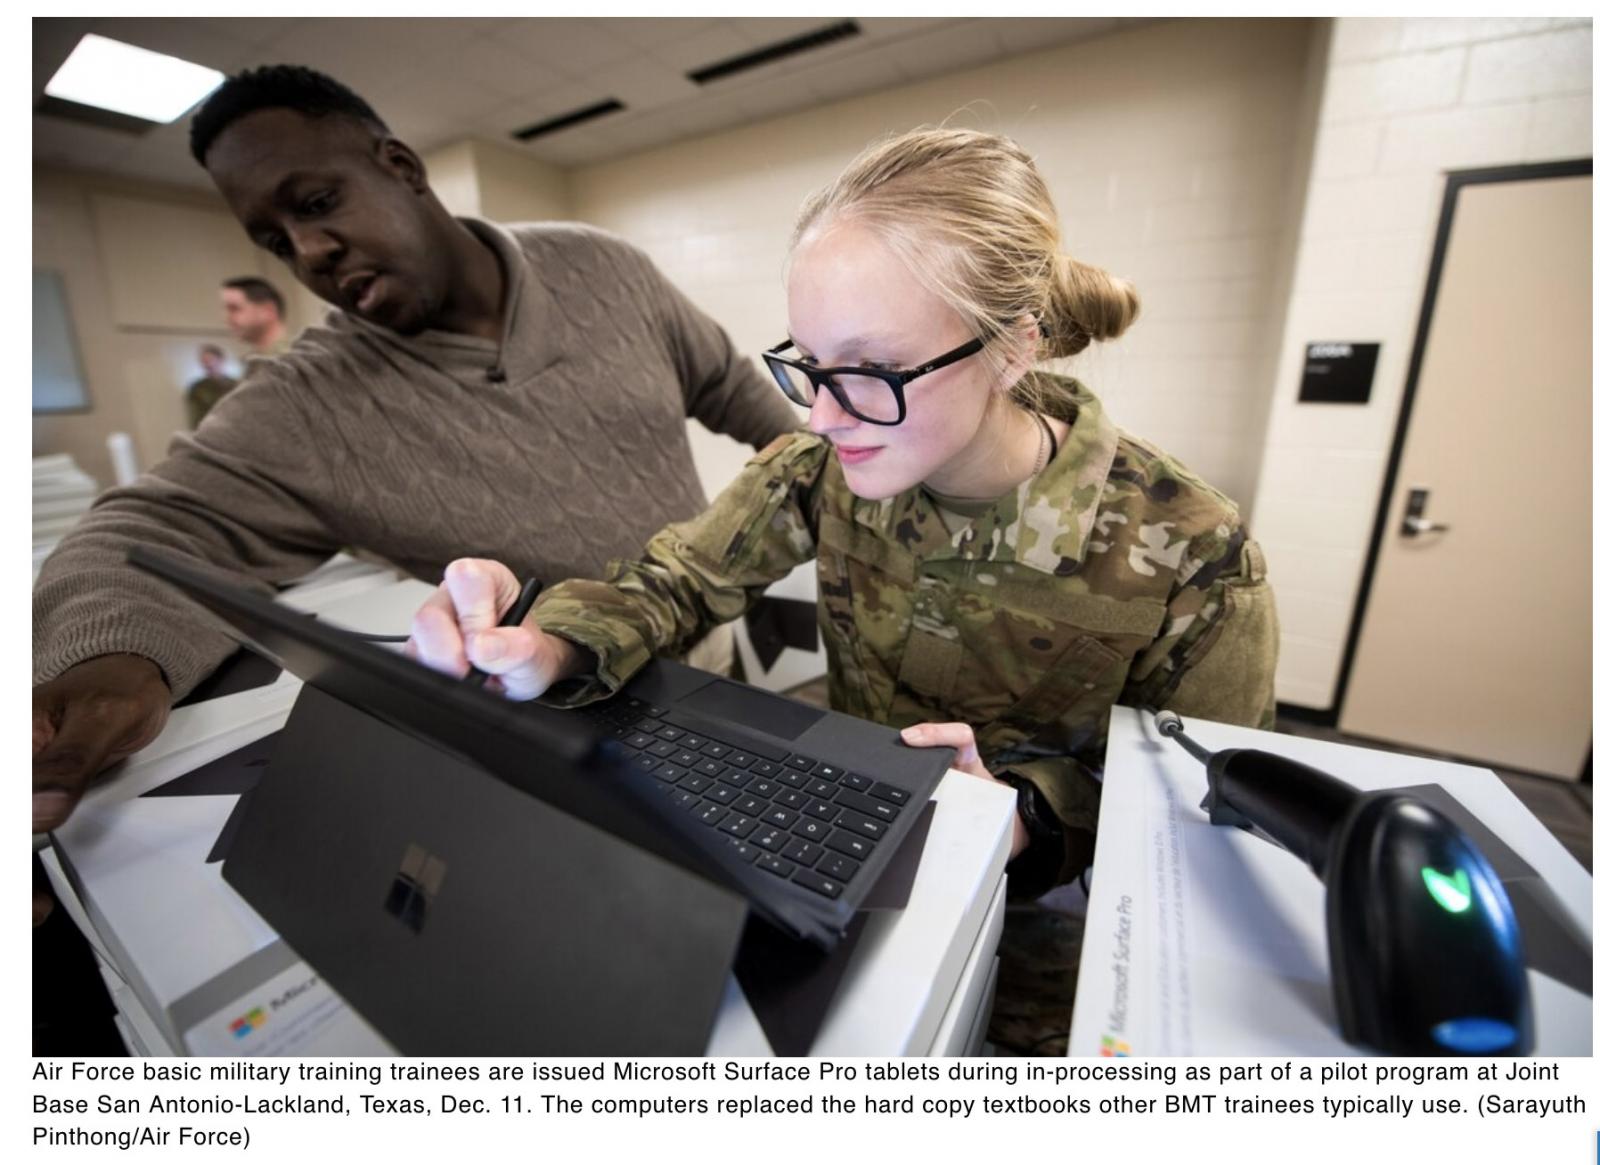  Air Force hopes tablets could revolutionize basic training